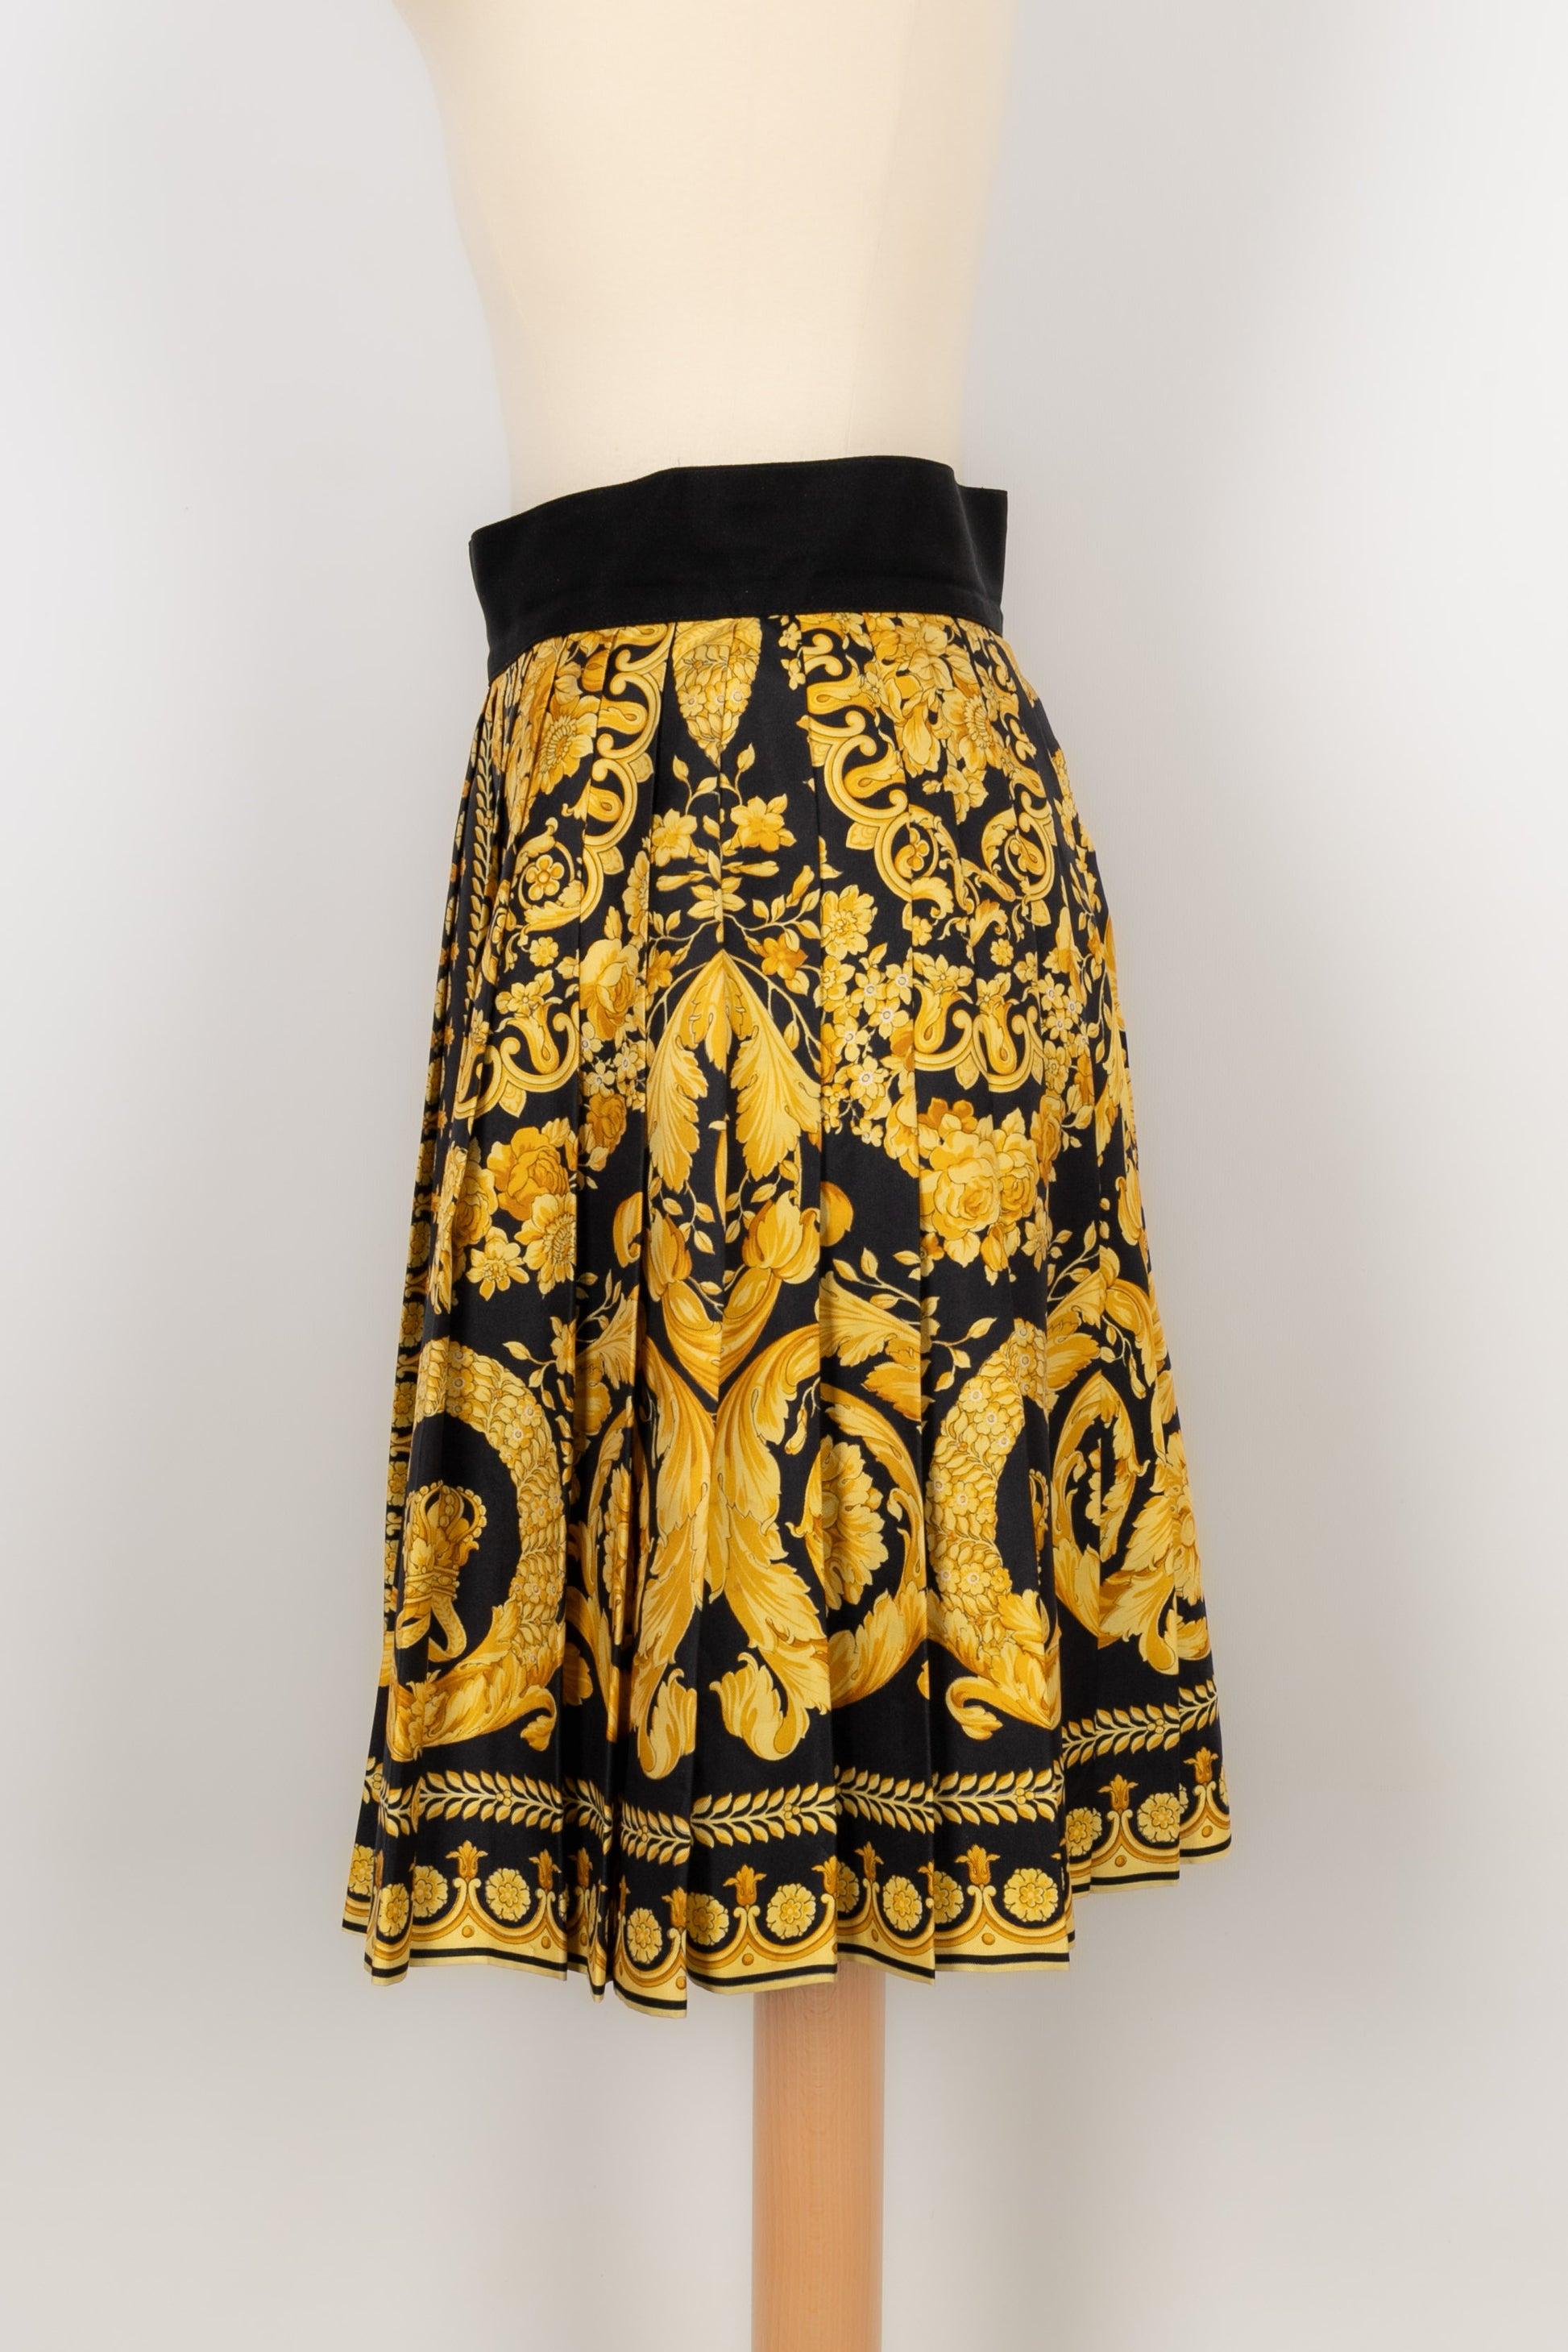 Versace - (Made in Italy) Silk pleated skirt with golden patterns on a black background. Indicated size 42IT, it fits a 38FR. Fall/Winter 1991 Collection.

Additional information:
Condition: Very good condition
Dimensions: Waist: 34 cm - Length: 47